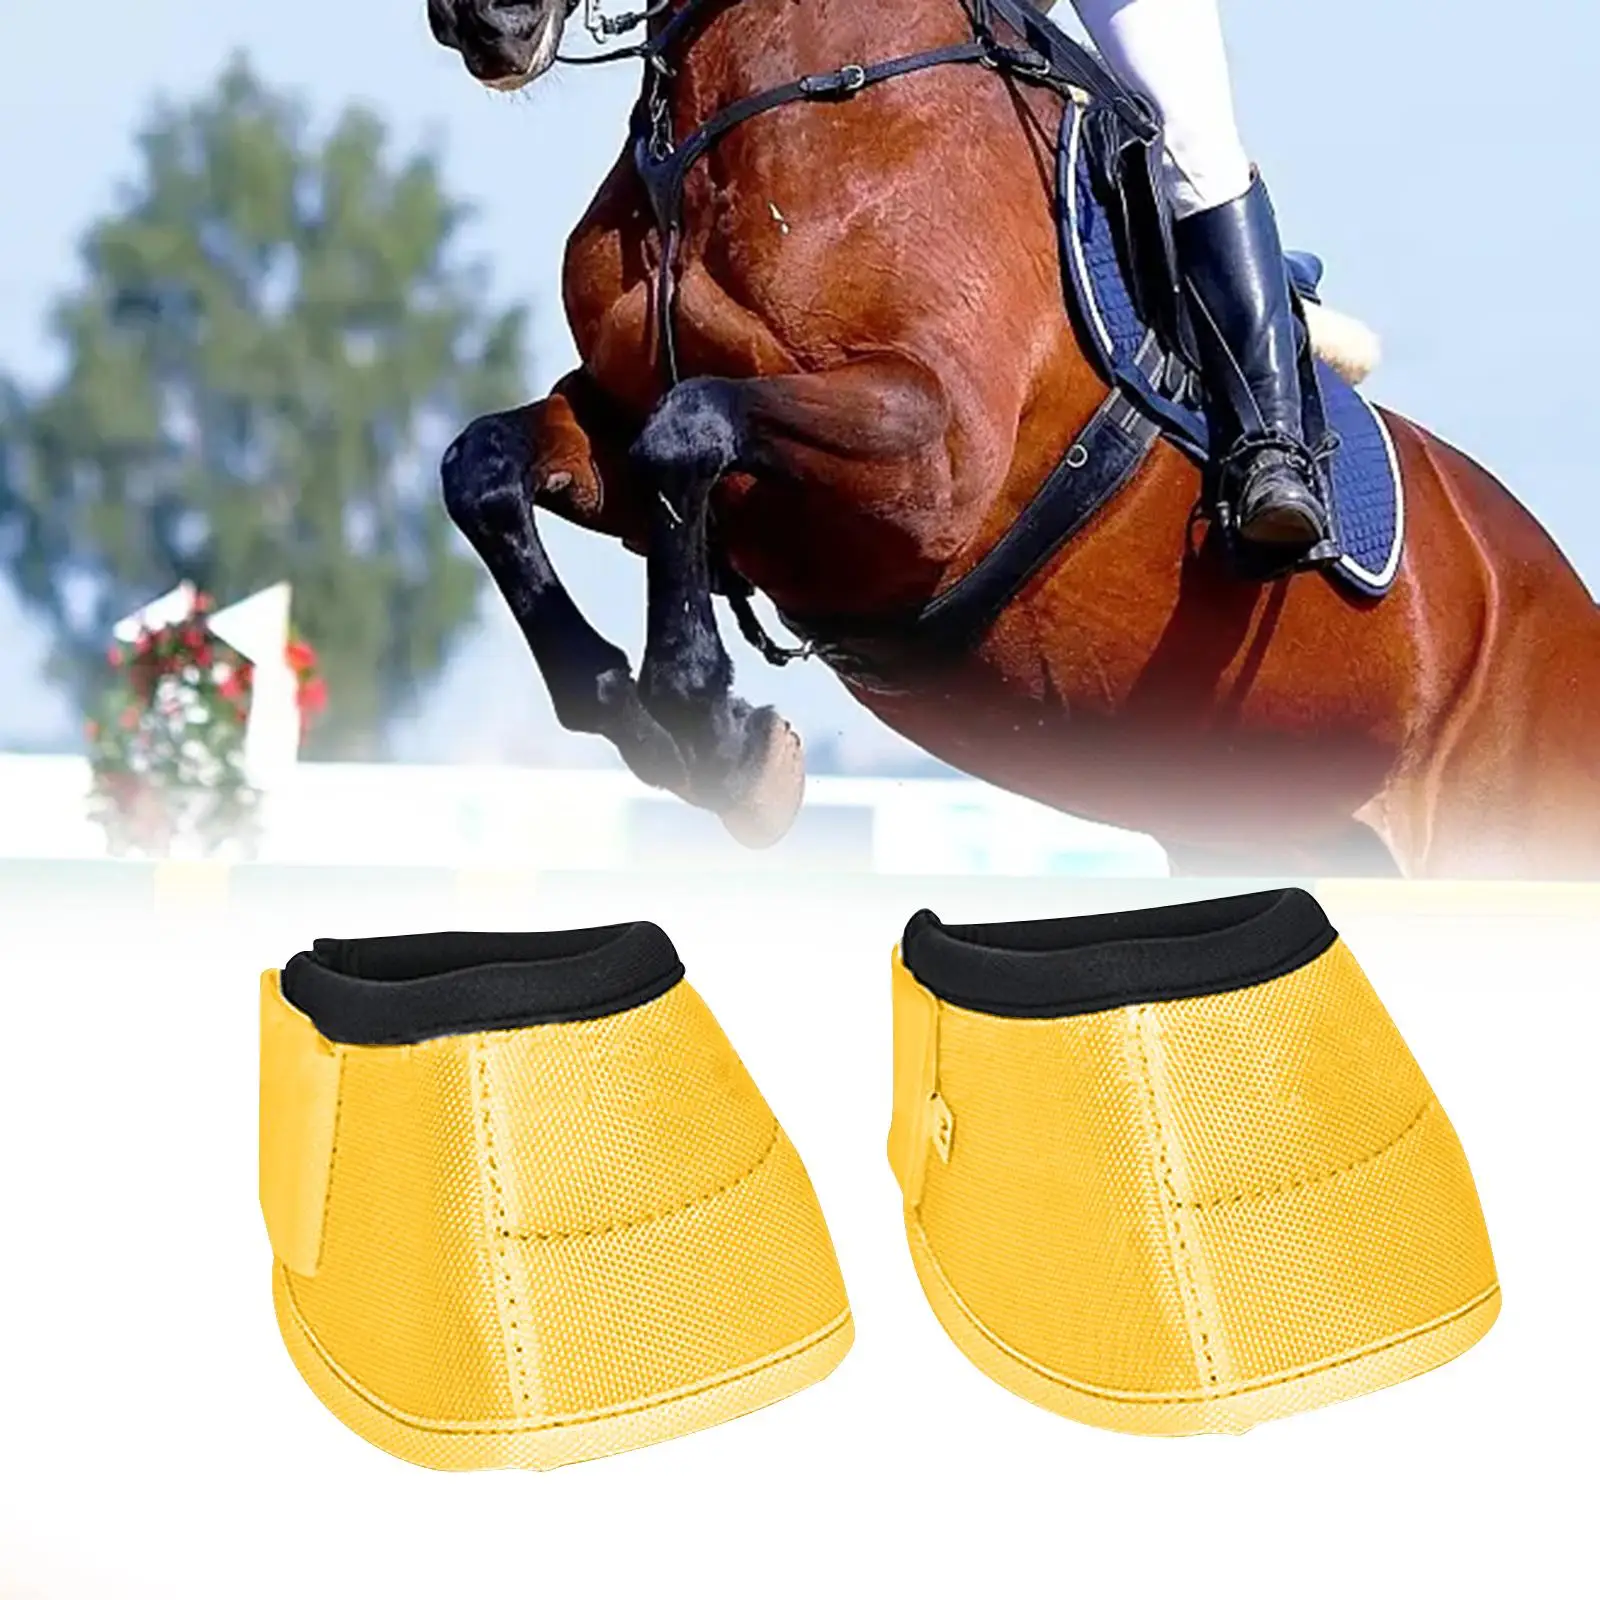 2Pcs Horse Bell Boots Horse Care Boot Sturdy Tear Resistant for Everyday Use